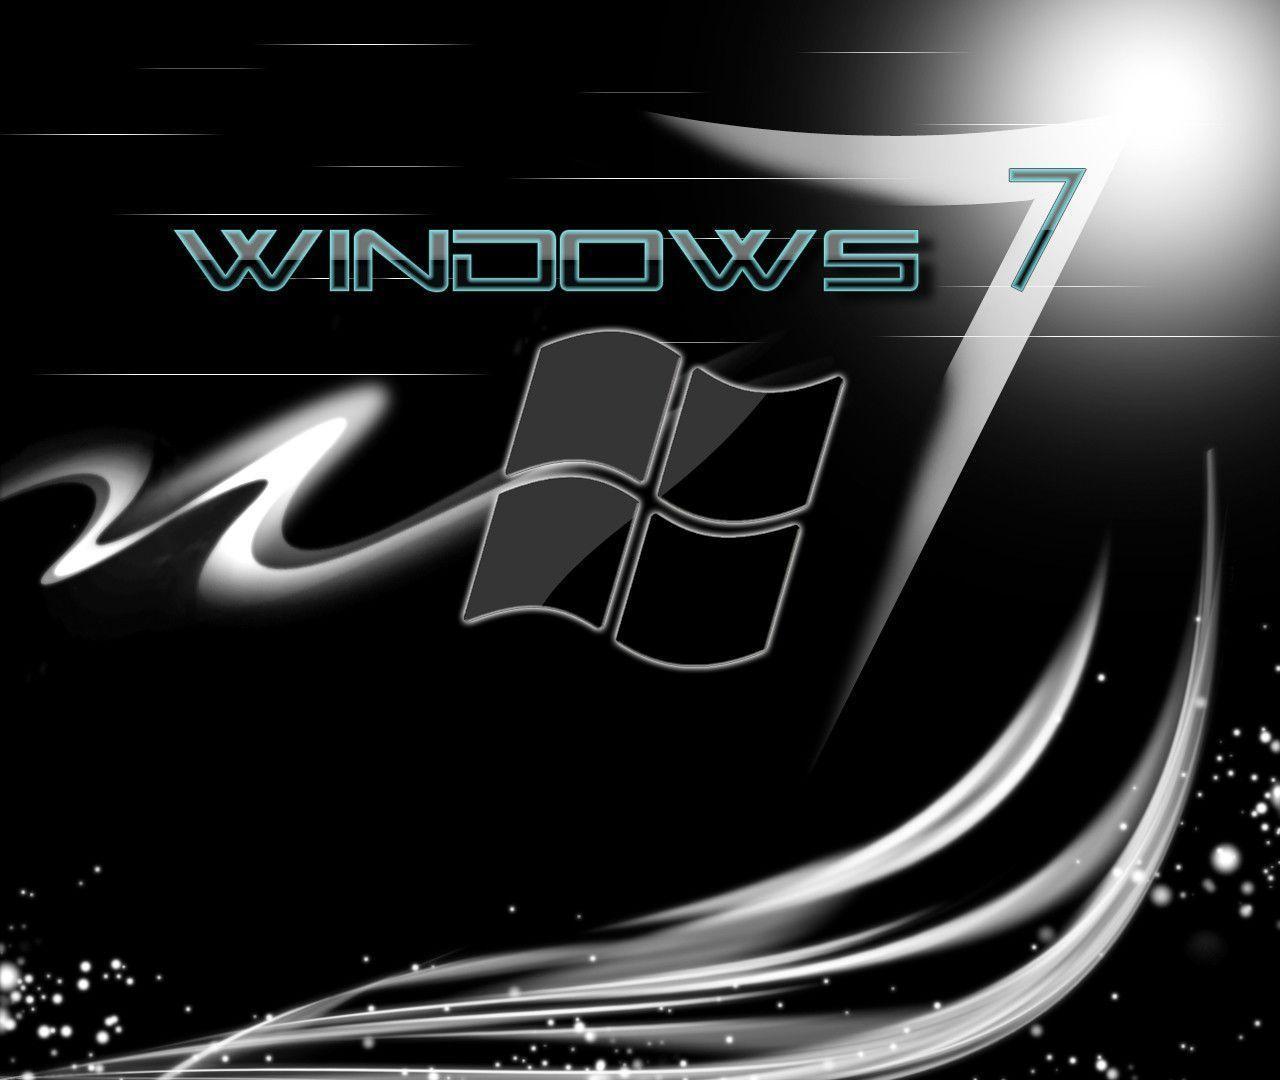 Cool Wallpaper For Desktop For Windows 7 Image & Picture